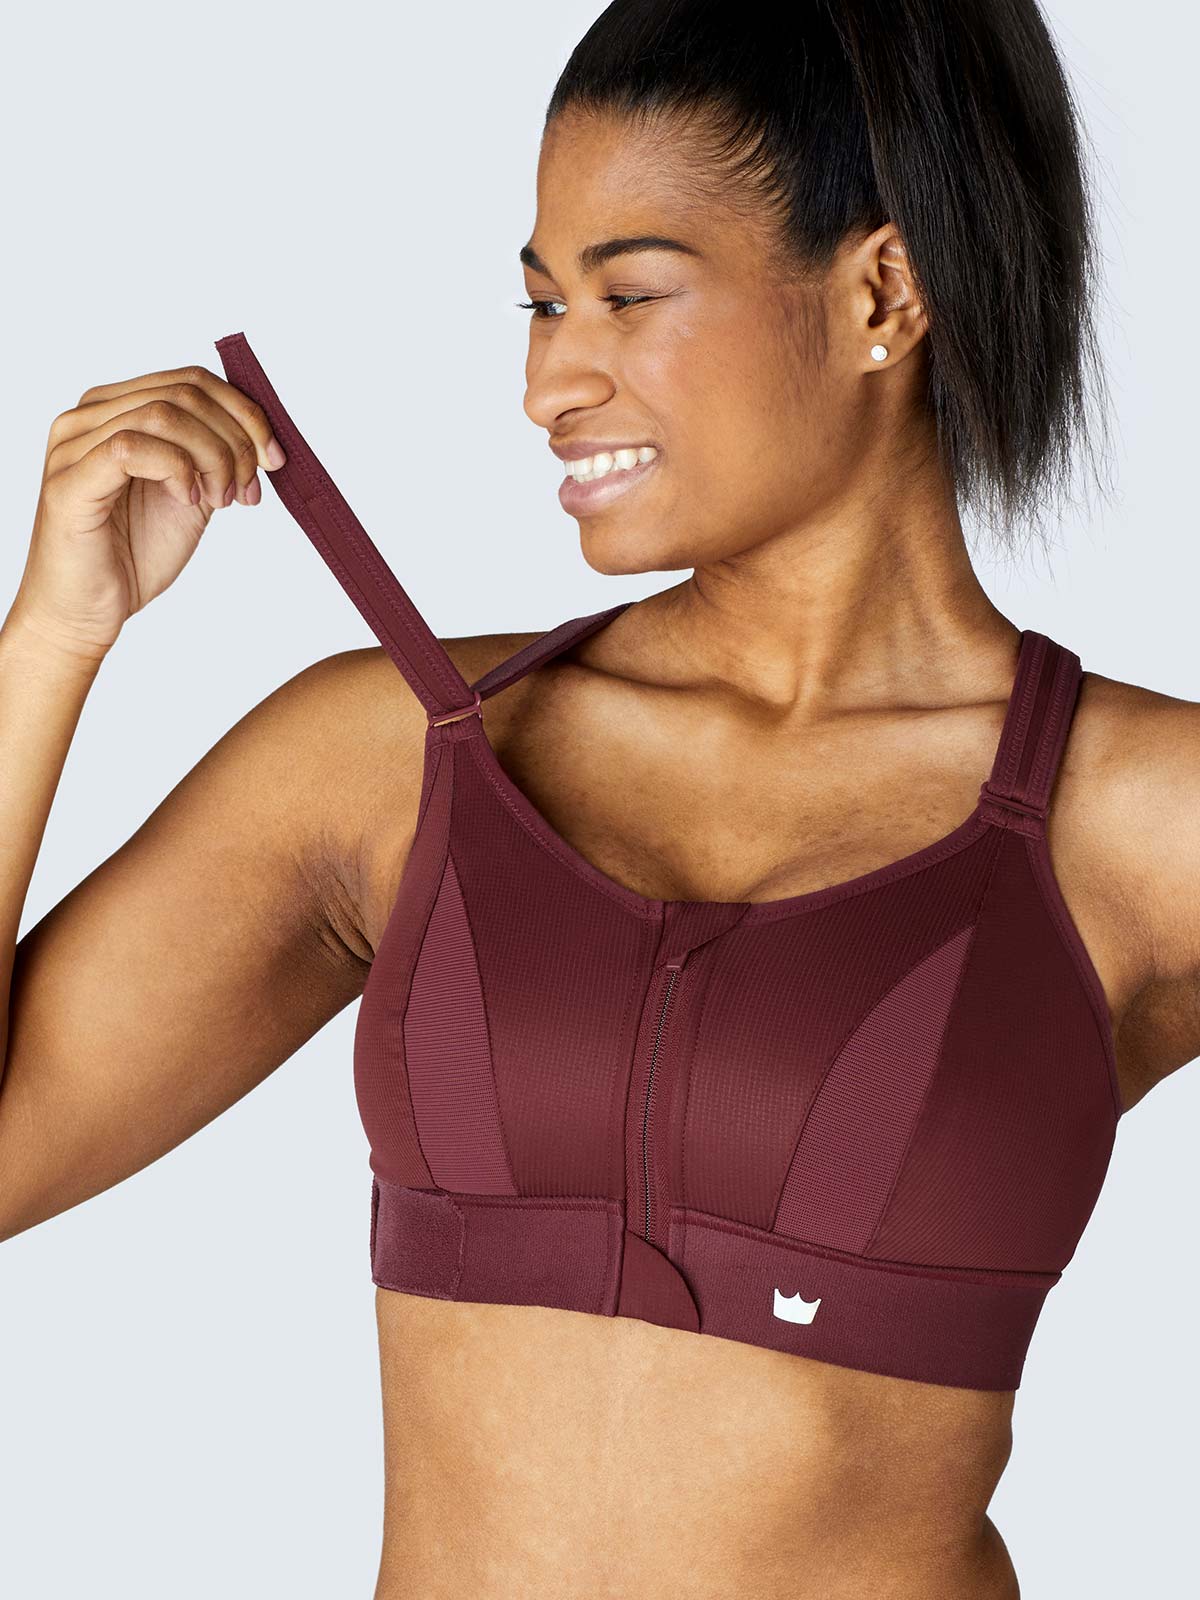 Buy nikhareenterpeise Women's Cotton Non-Padded Wire Free Sports Bra Combo  Full-Coverage Sport Bras Combo They Moves Easily and Comfortably (30,  Maroon) at